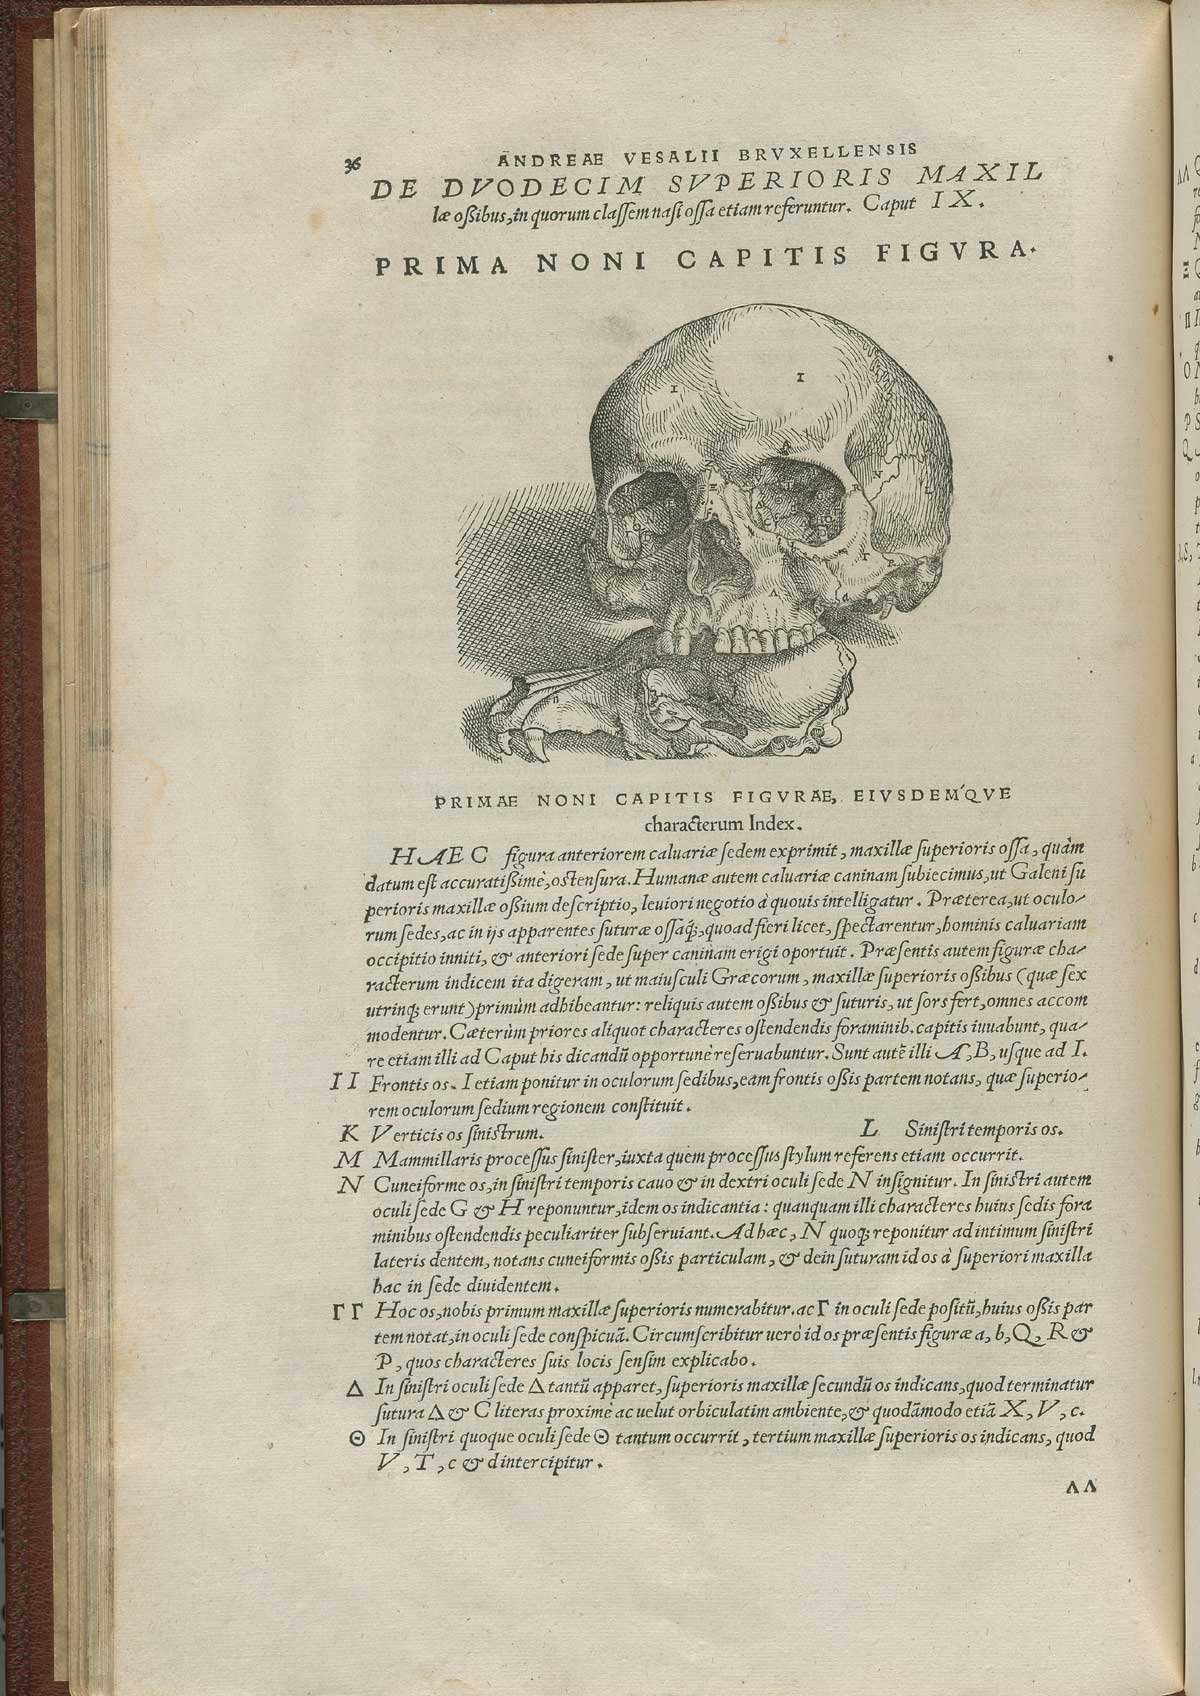 Page 36 of Andreas Vesalius' De corporis humani fabrica libri septem, featuring the front view of the skull with the jawbone removed, contrasted to an animal skull.